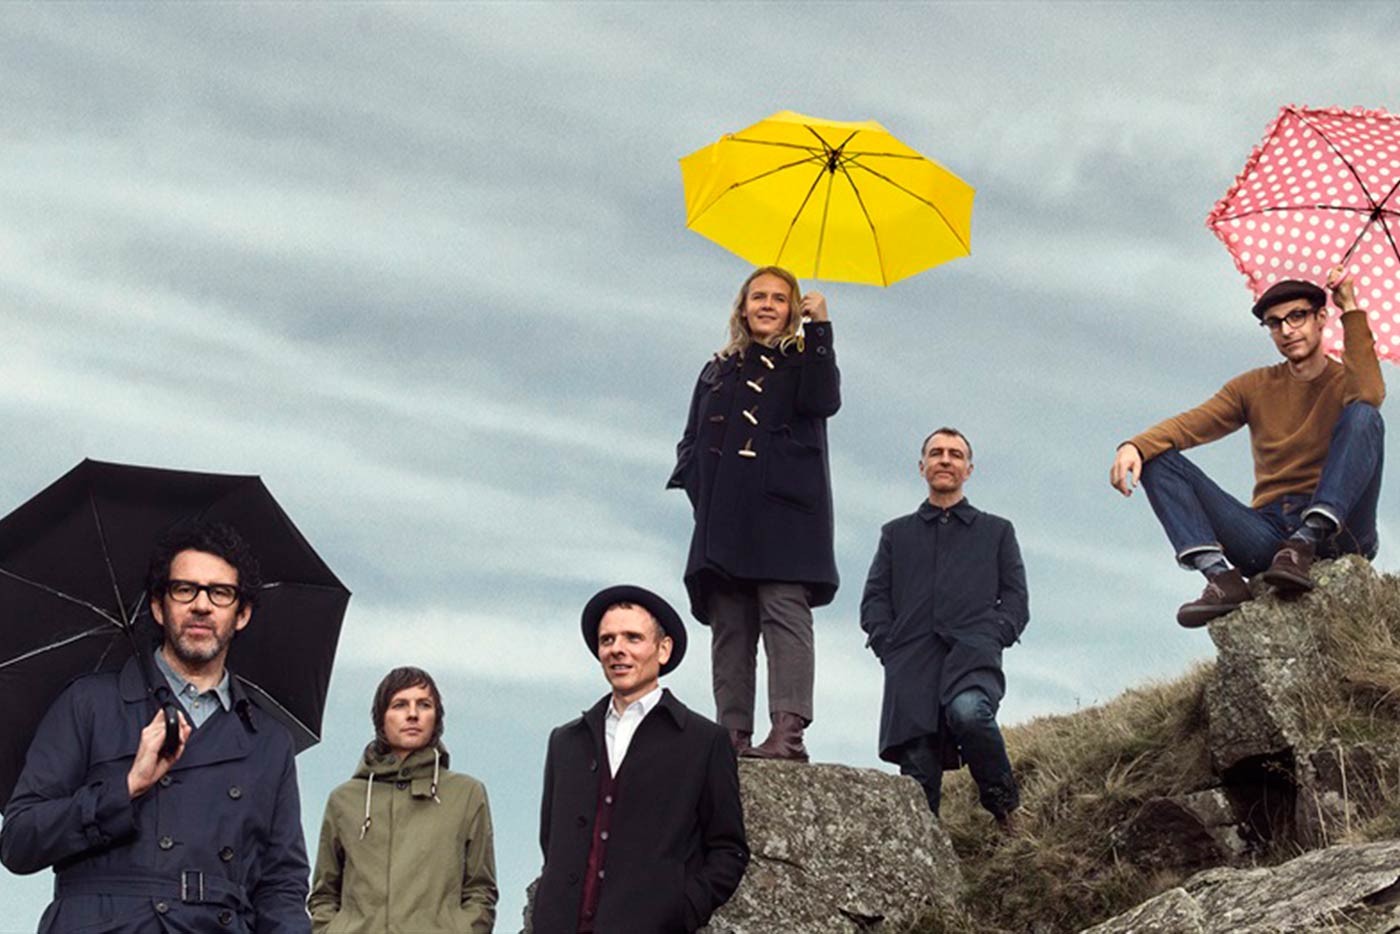 "Protecting The Hive", proyecto colaborativo de Belle And Sebastian